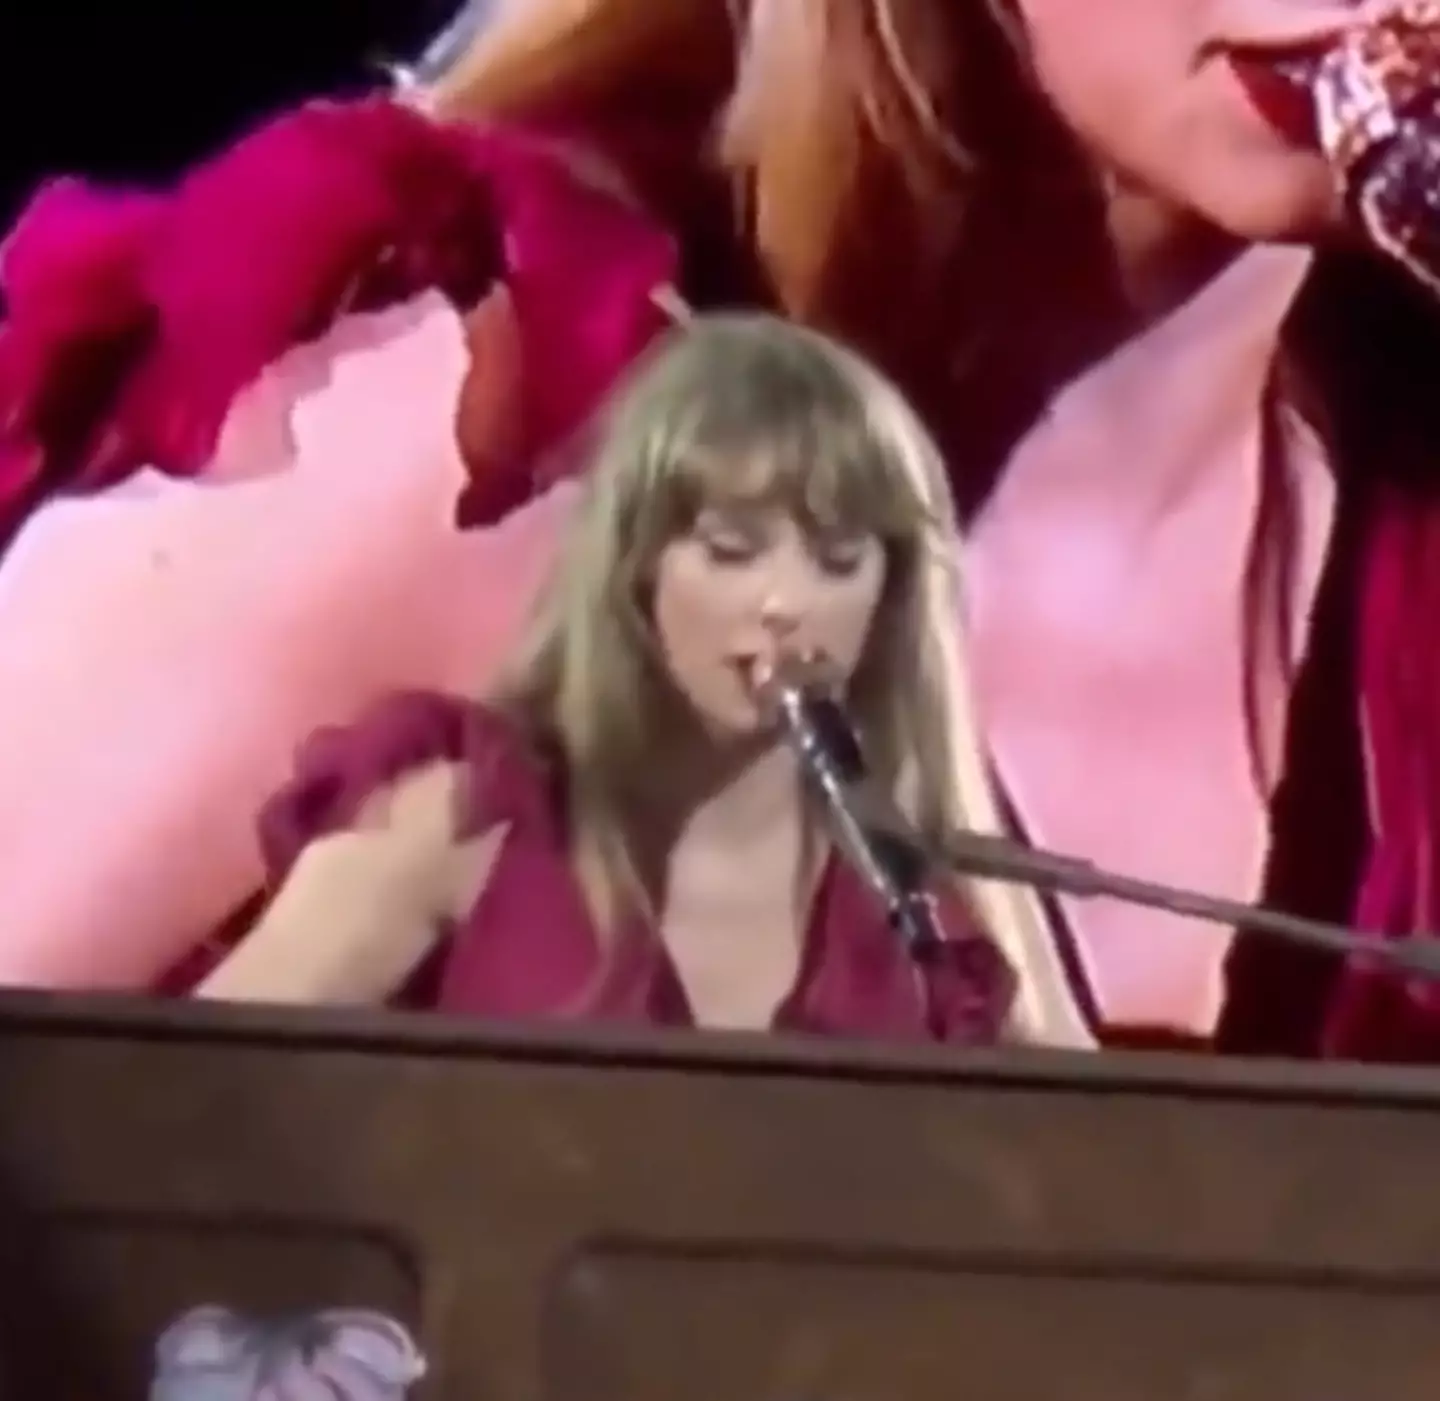 Taylor Swift was preparing to play a song when the piano went rogue.